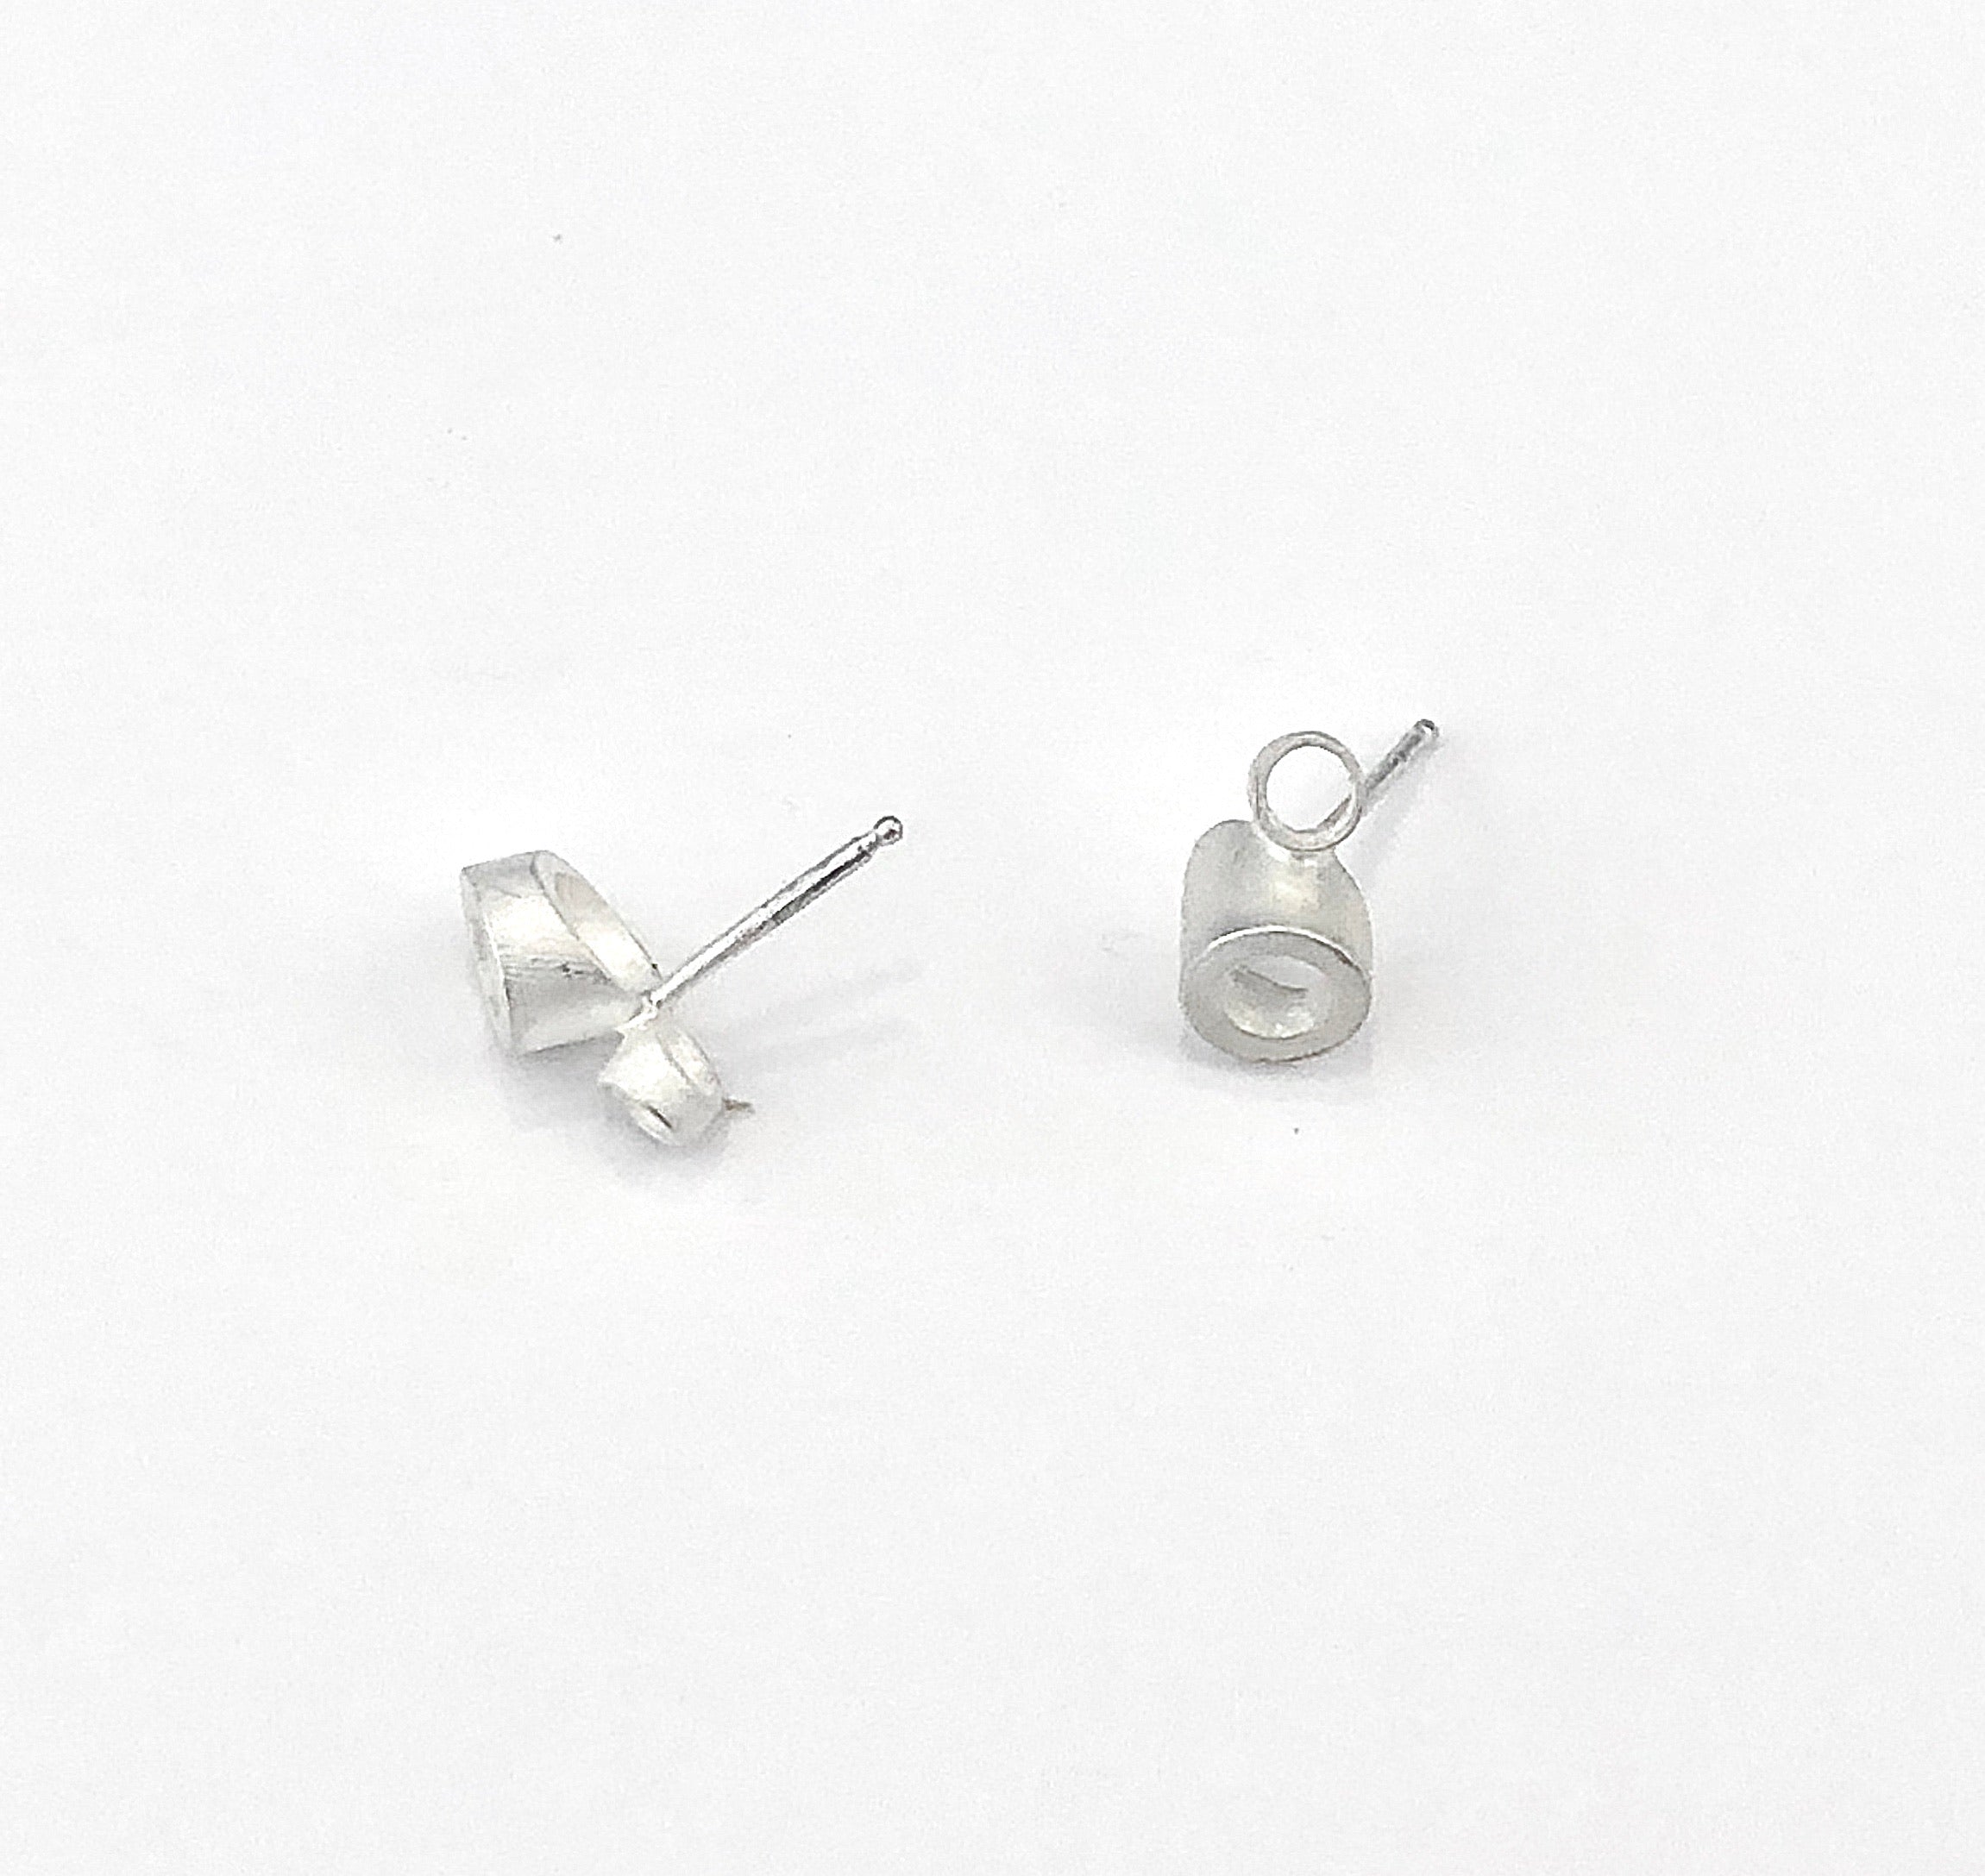 Double Angled Tube Post Earrings in matted silver